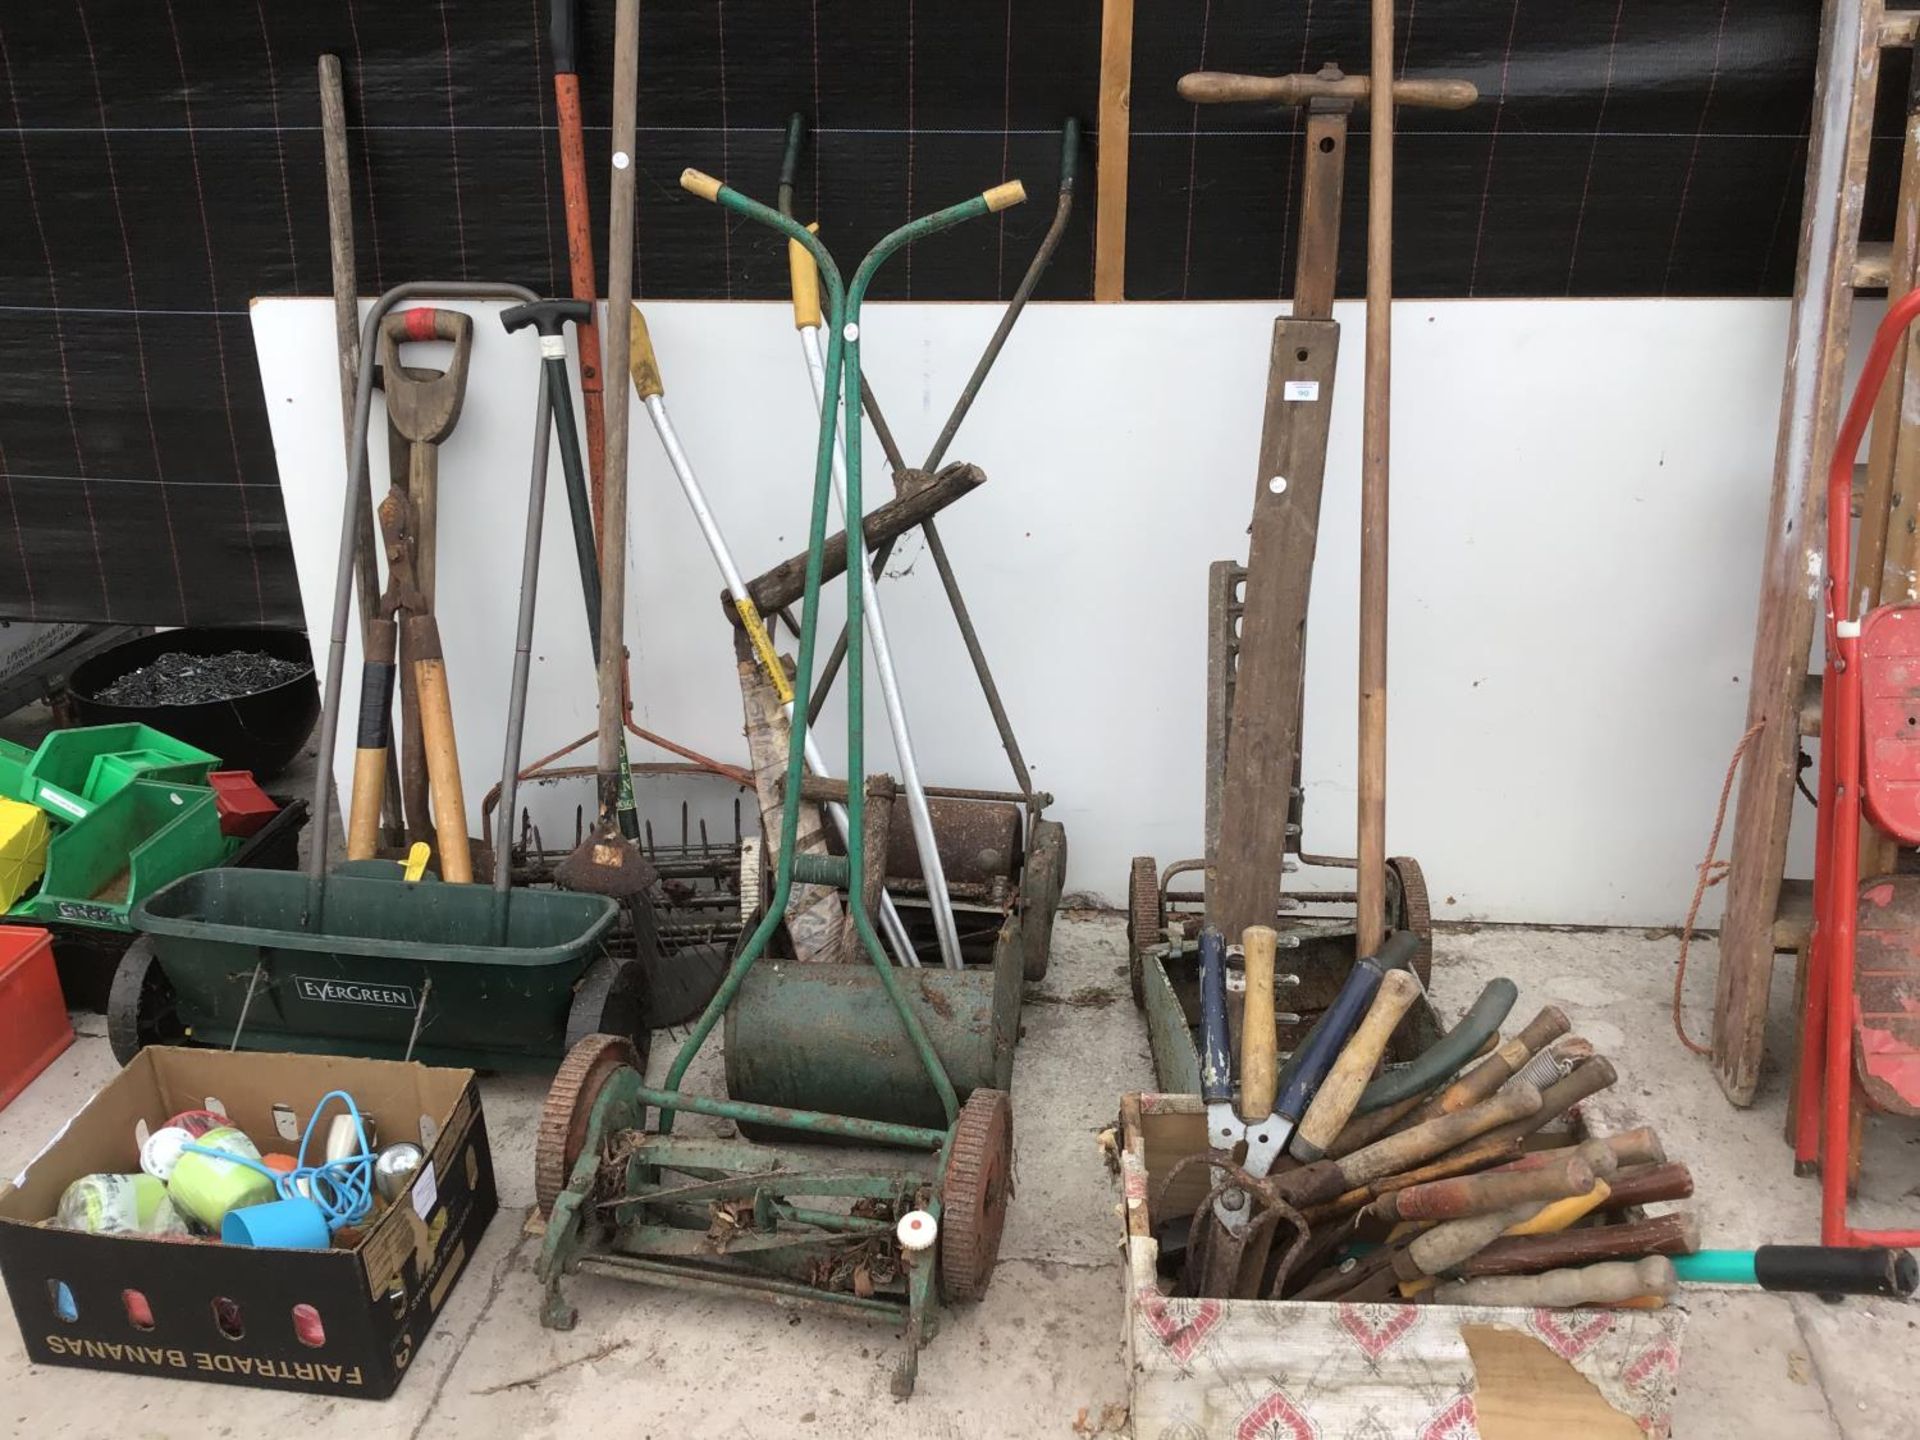 A LARGE COLLECTION OF VINTAGE GARDENING TOOLS TO INCLUDE SHEARS, MOWERS, SPADES ETC